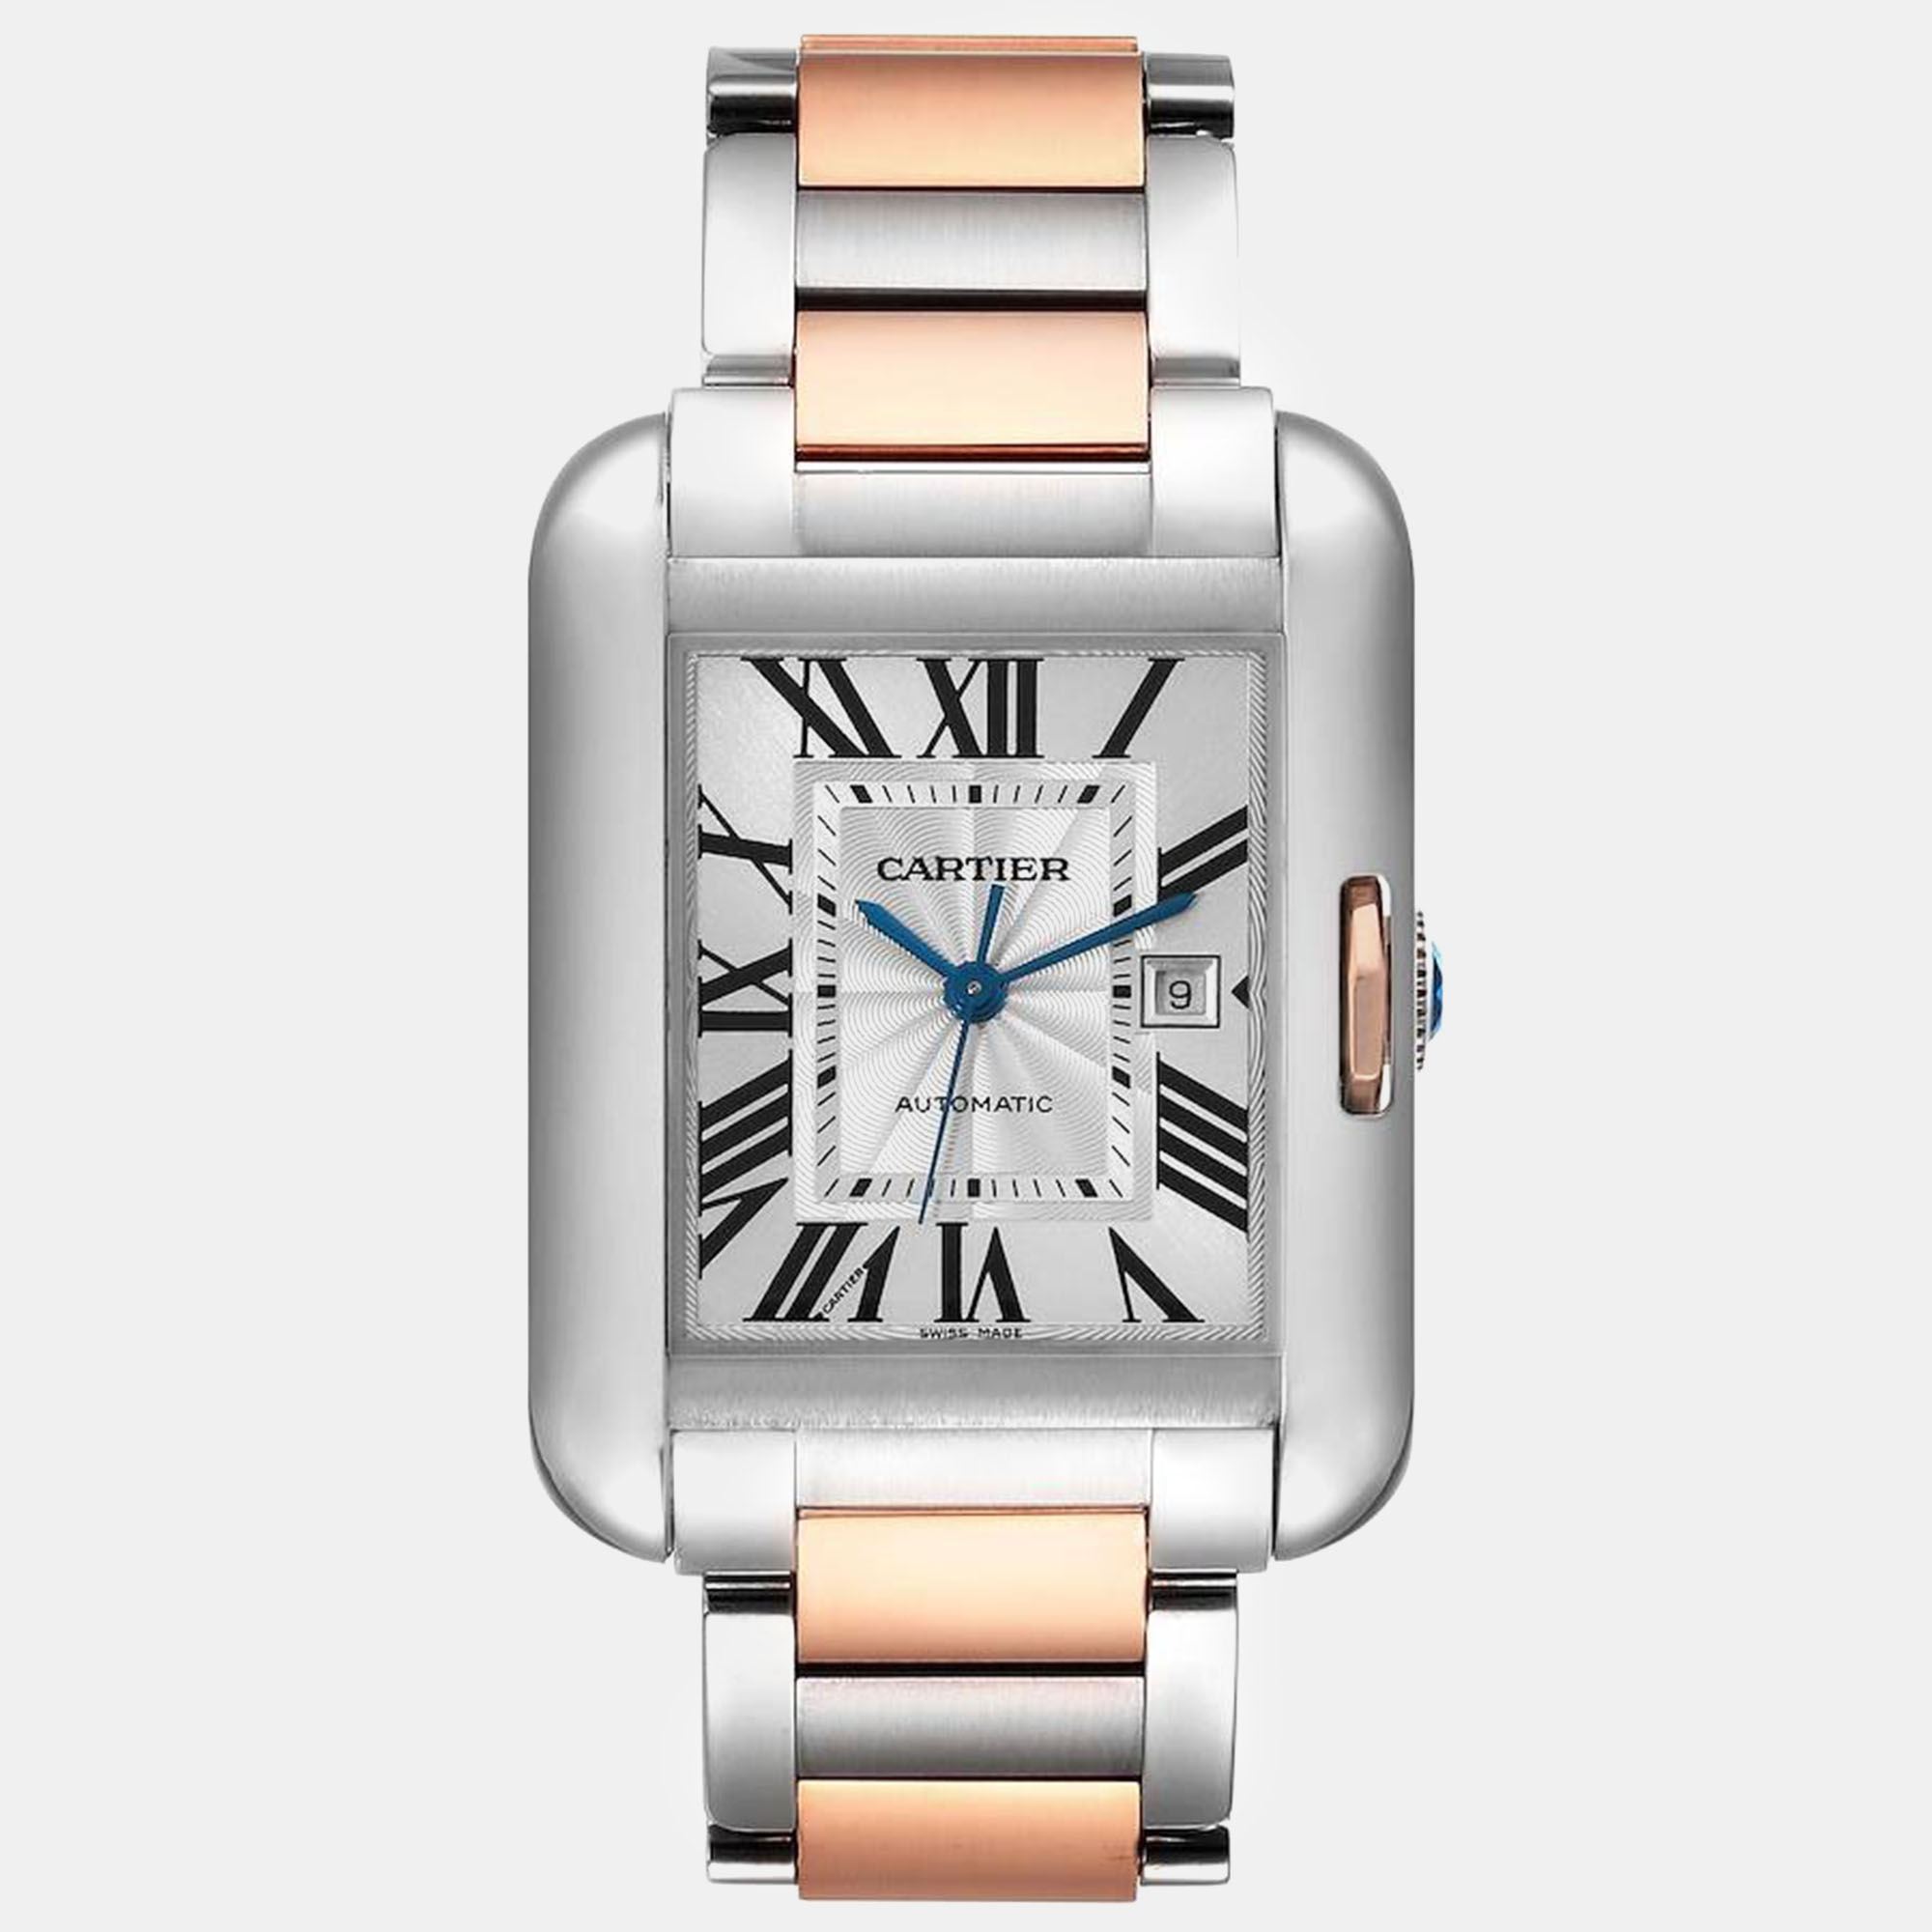 Cartier tank anglaise large steel rose gold men's watch w5310037 39.2 x 29.8 mm